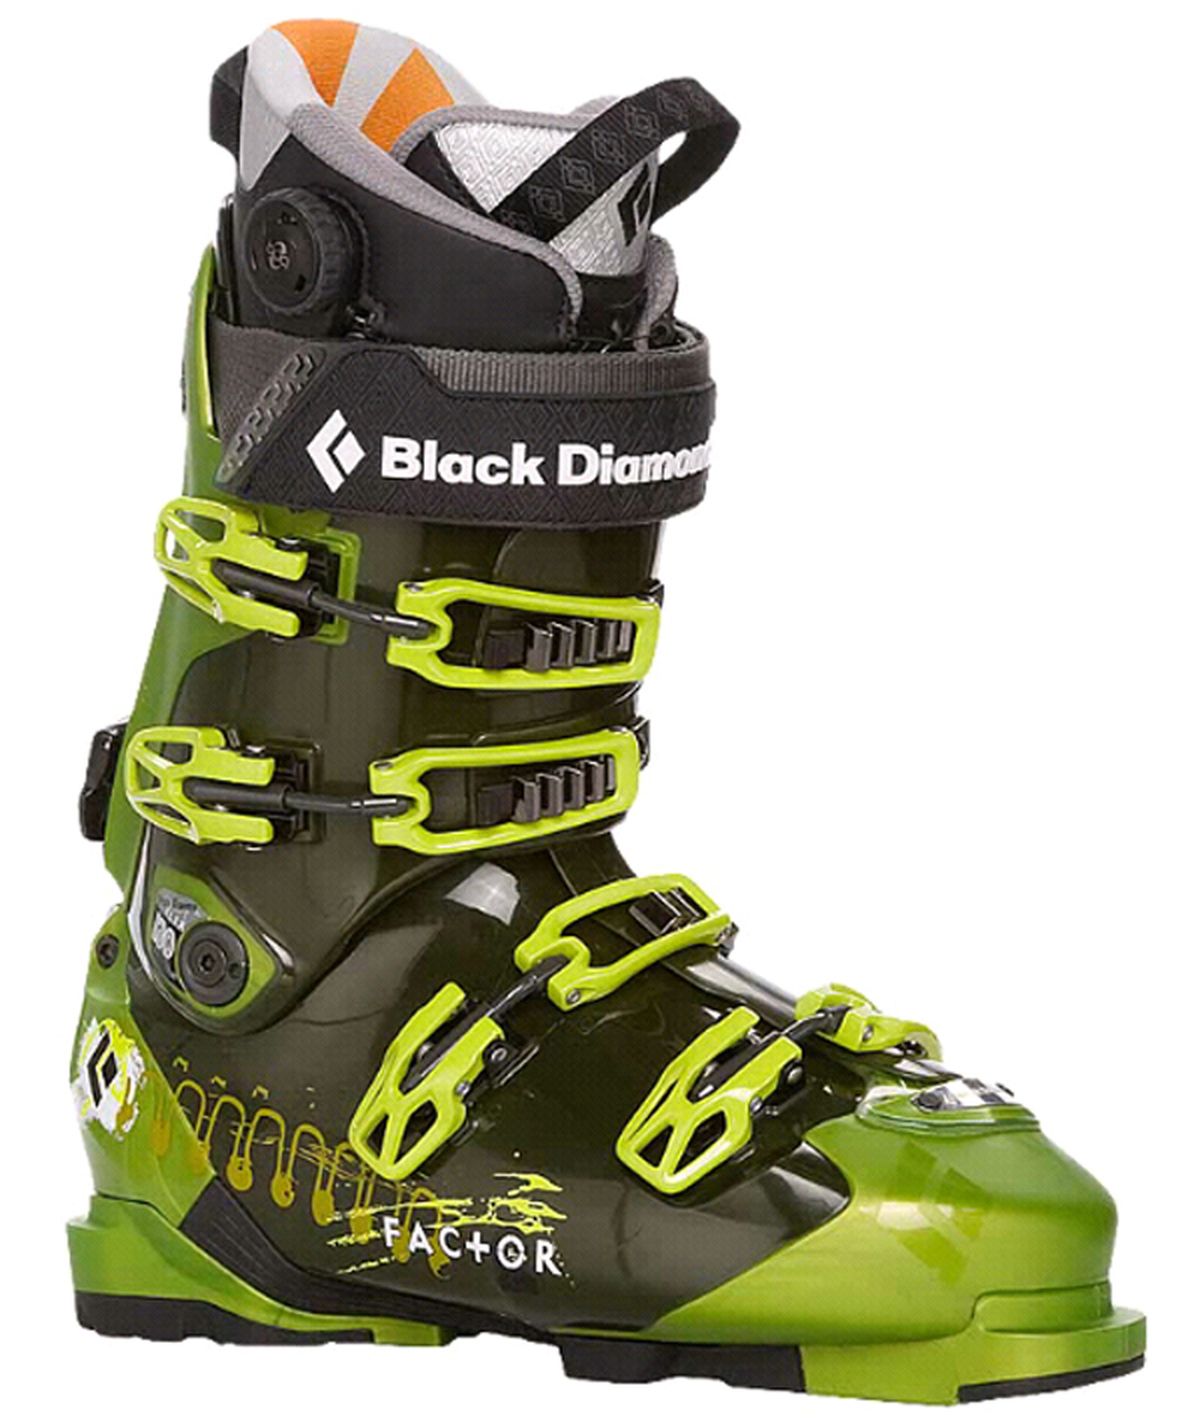 Black Diamond’s Factor boot has a switchable sole for various bindings.Courtesy of Black Diamond (Courtesy of Black Diamond / The Spokesman-Review)